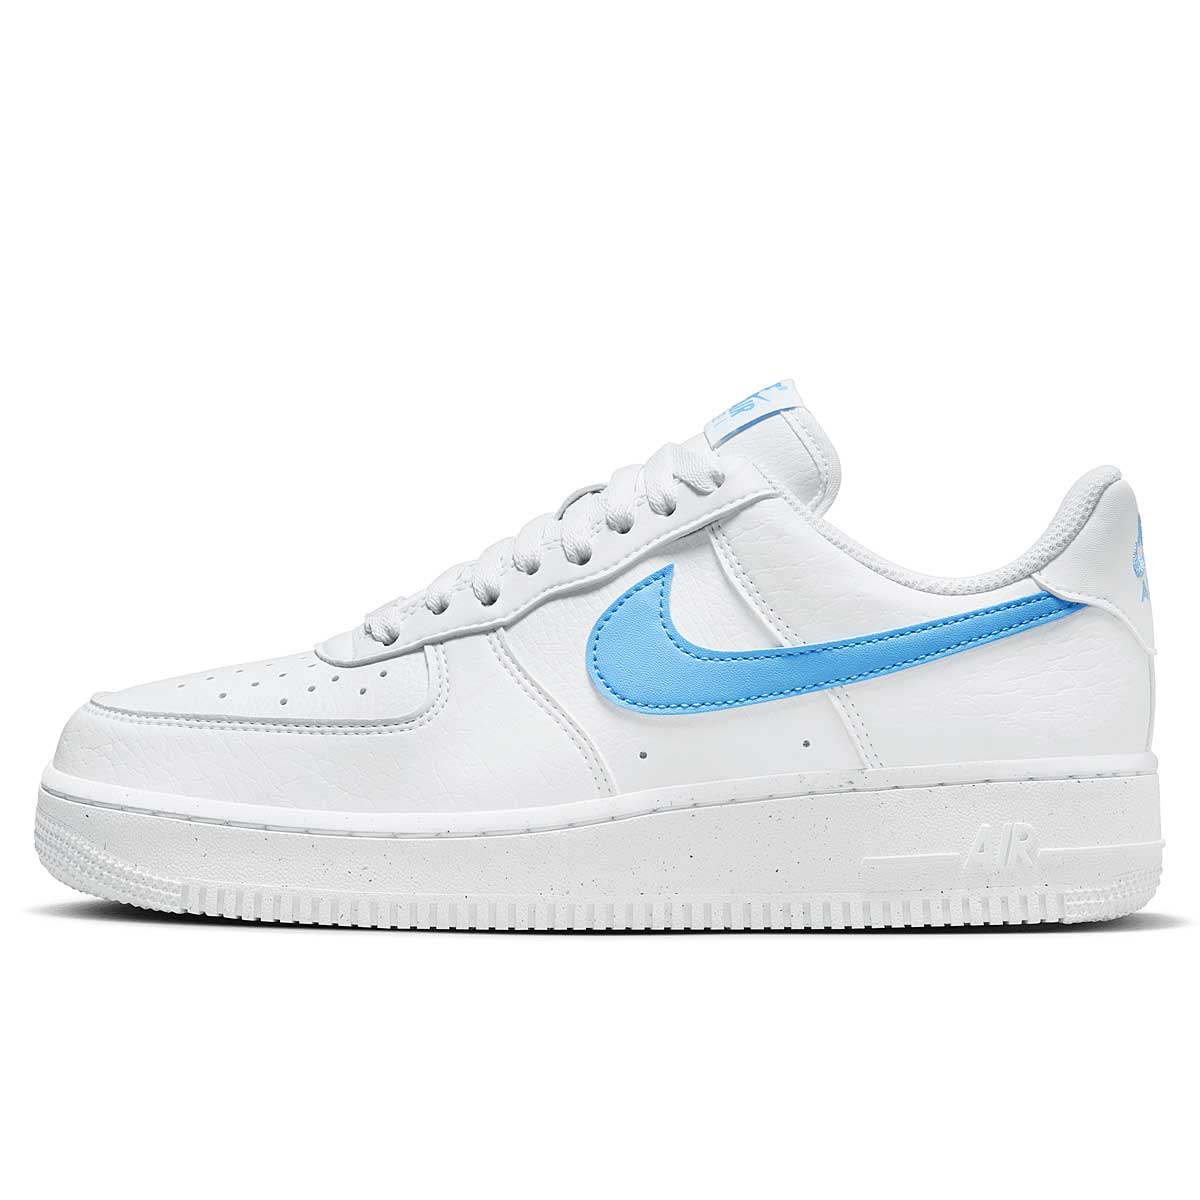 Buy WMNS AIR FORCE 1 ‘07 NEXT NATURE for EUR 119.90 on KICKZ.com!